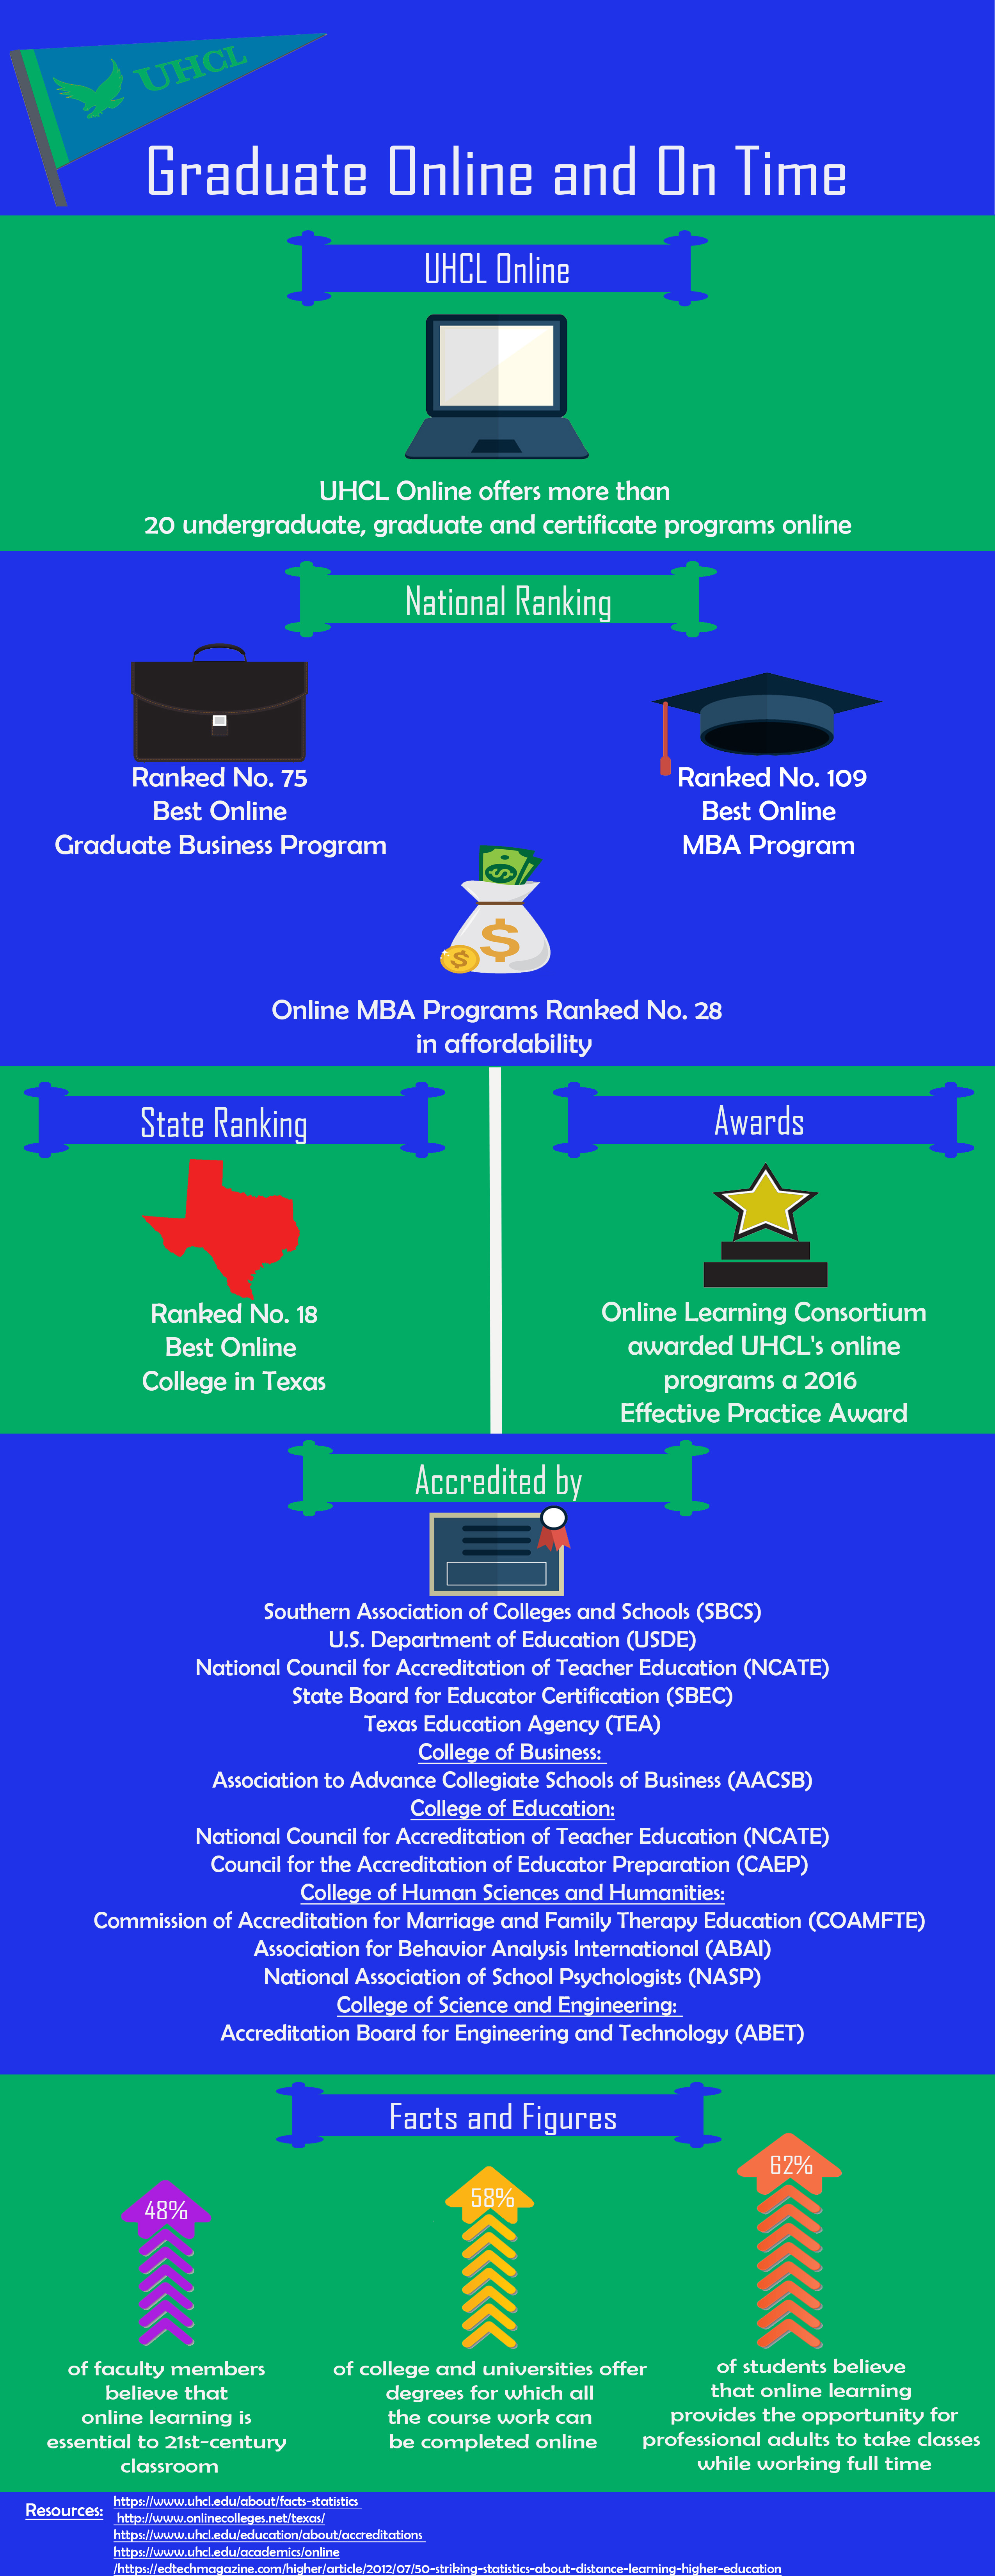 GRAPHIC: An infographic guide of UHCL Online resources offered to students by UHCL.